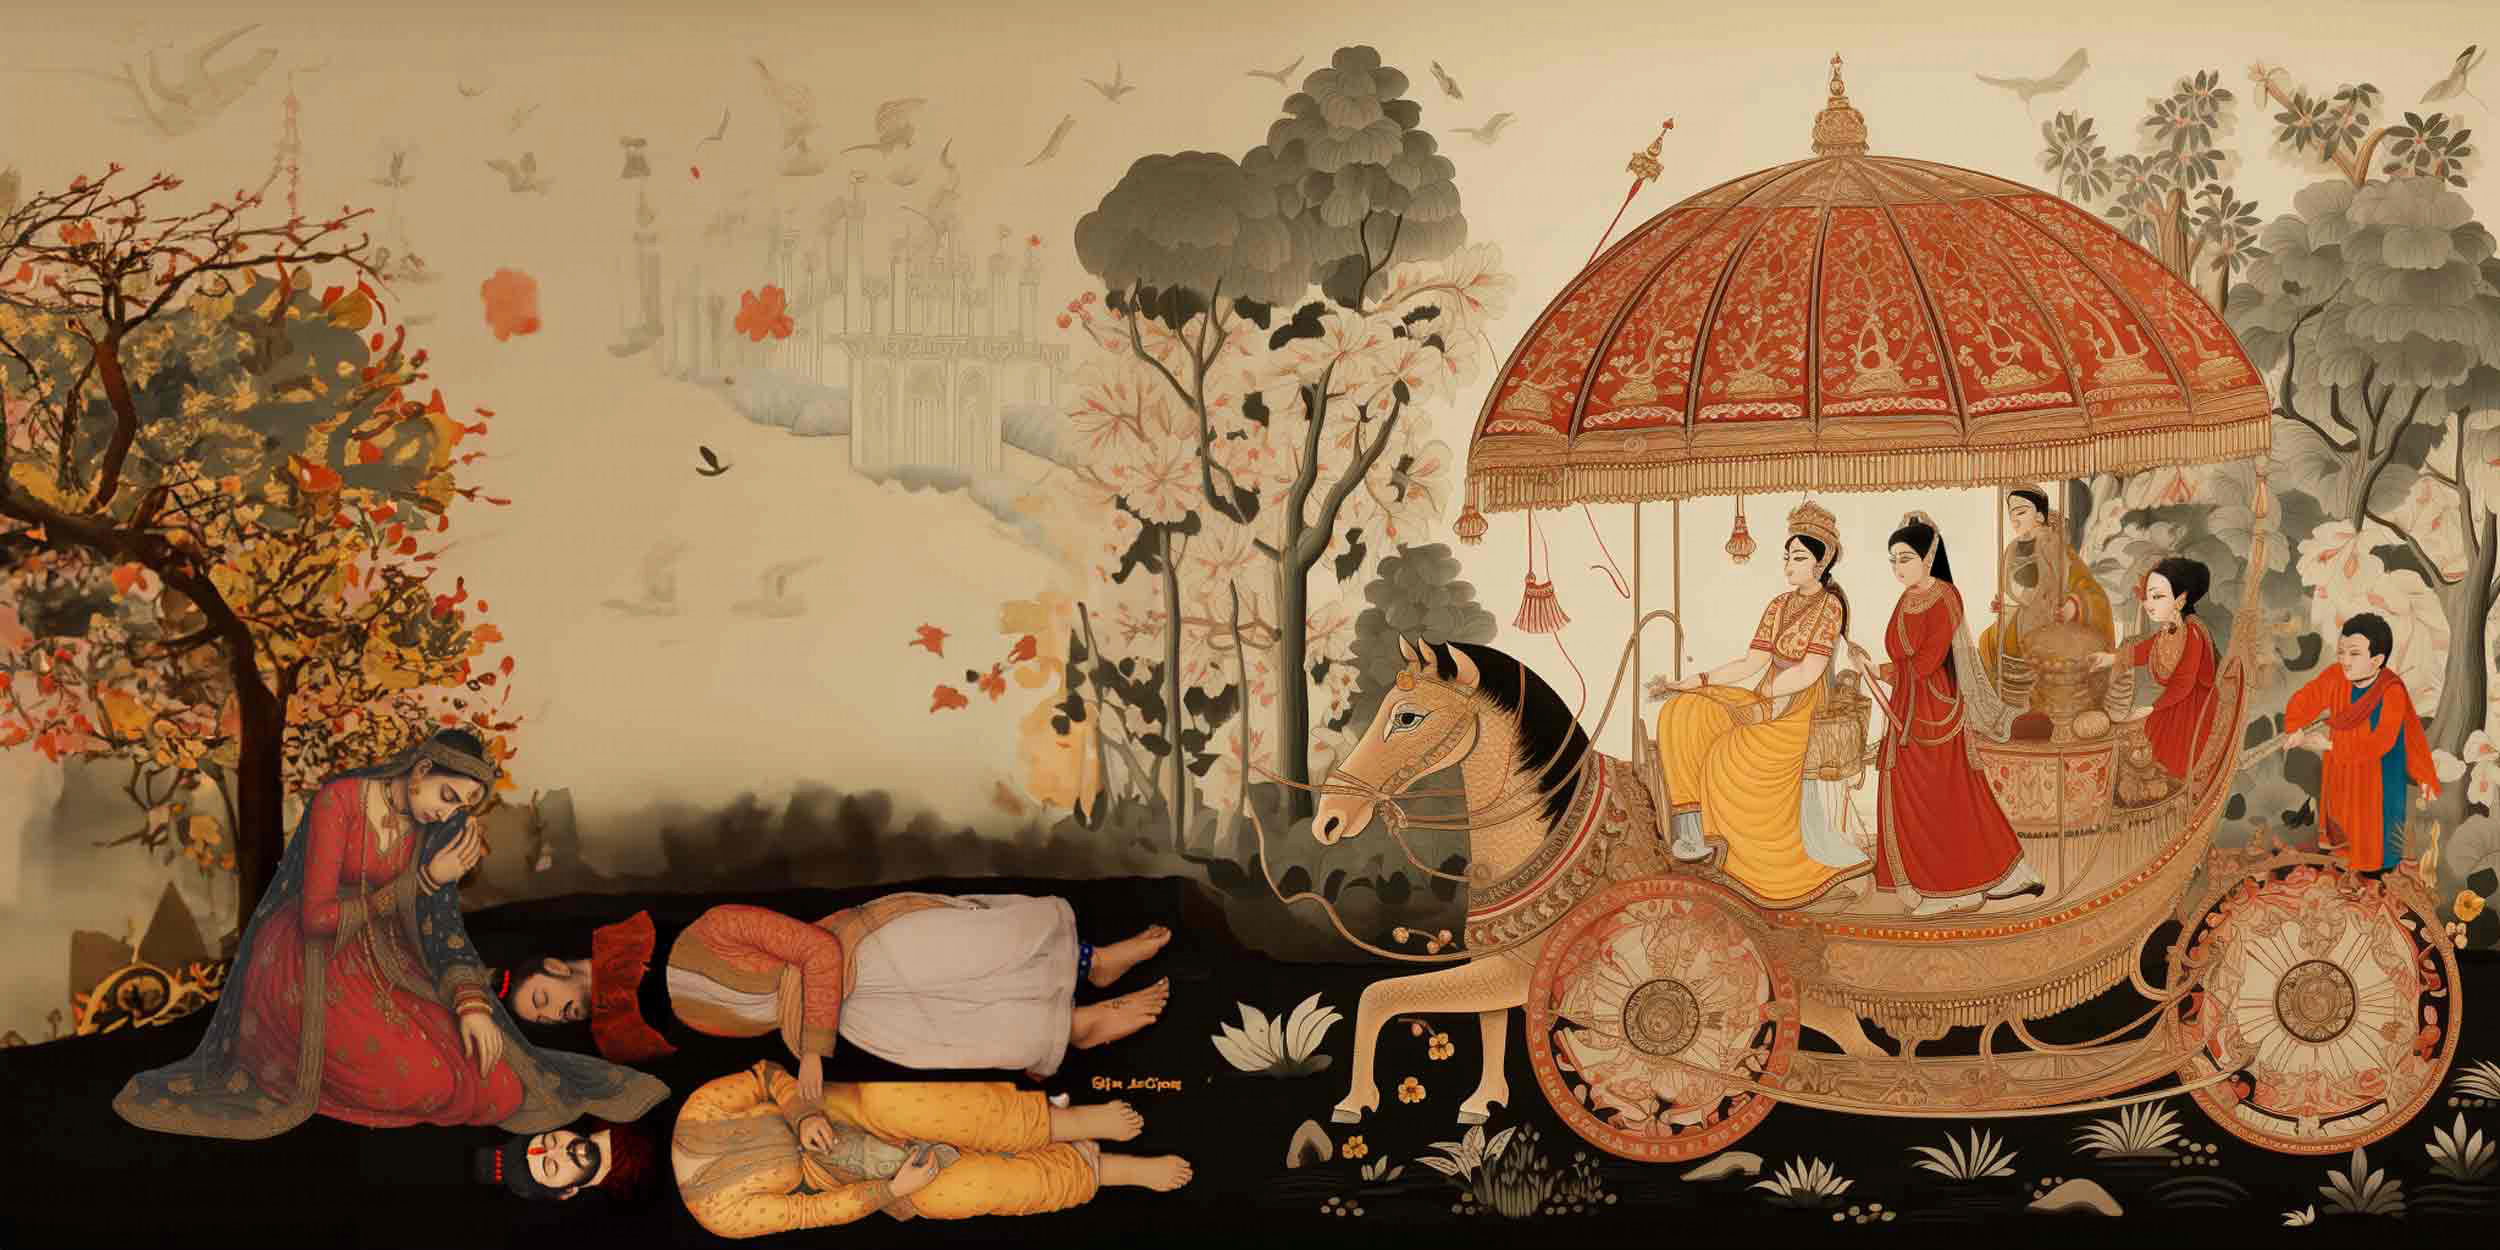 painting by an artist about how the kayamukulam queen saw the mother